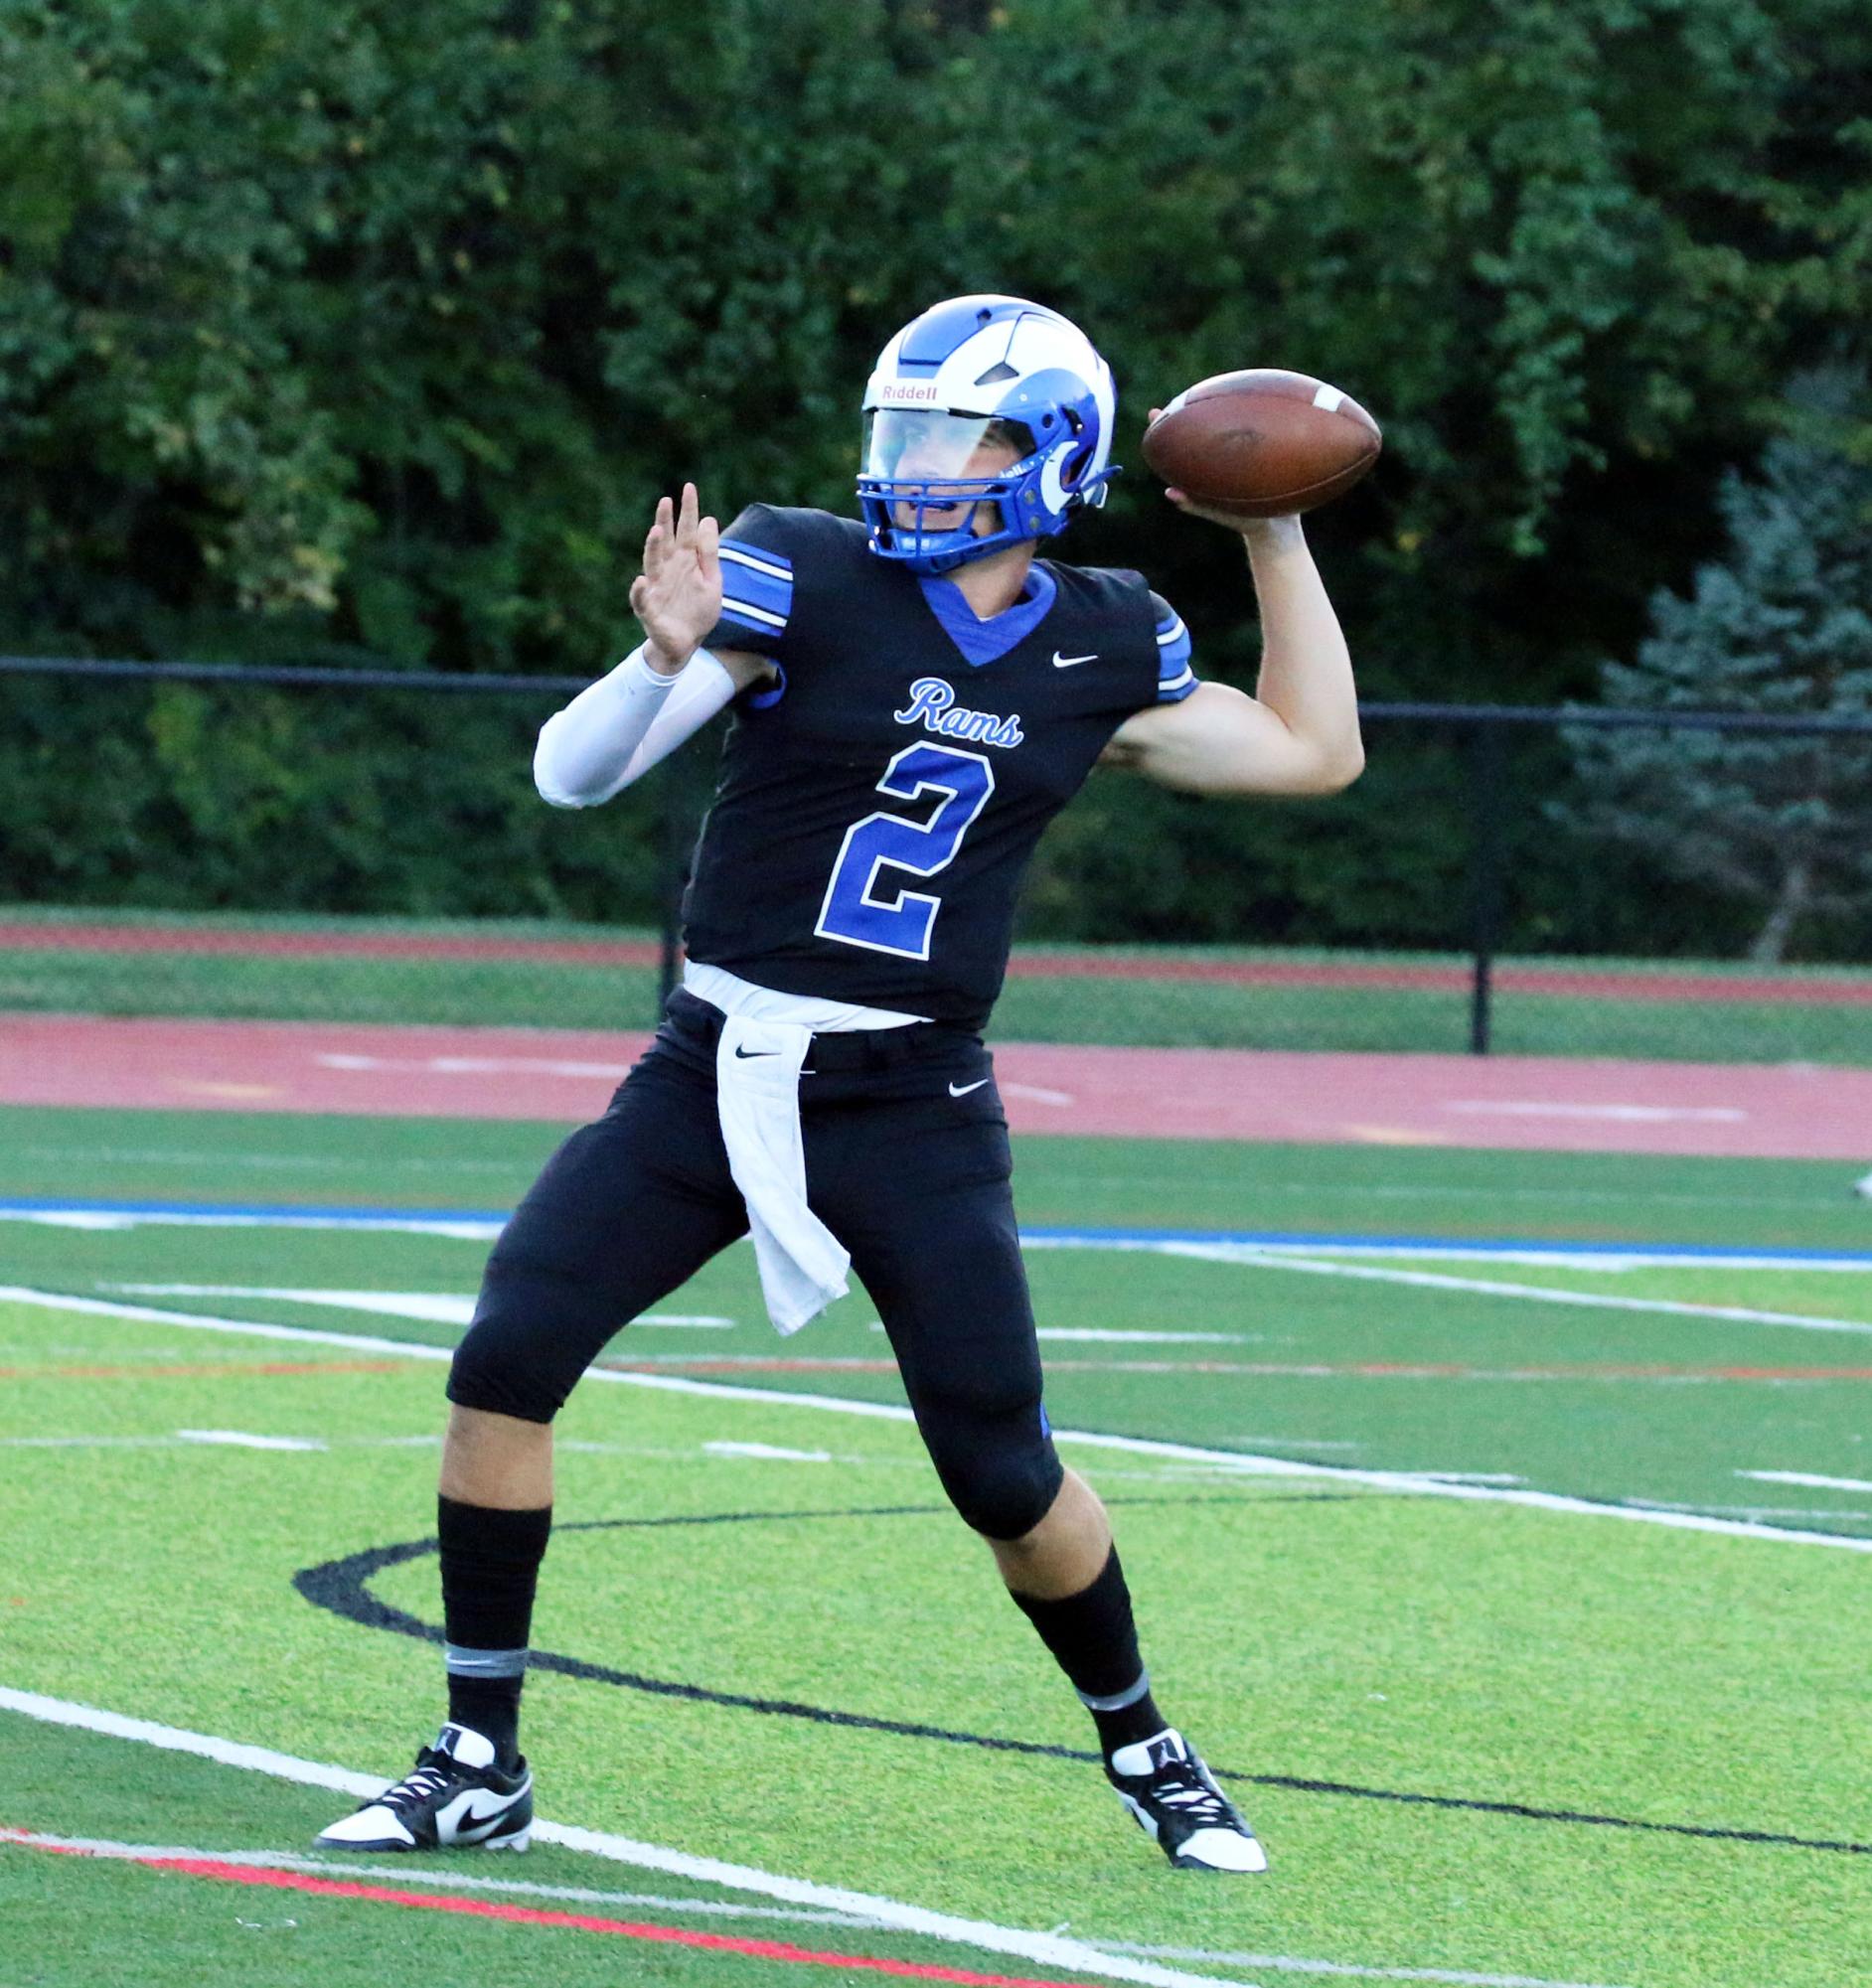 Beau Dolan (12) winds up to
throw in a game against Lindbergh at
the Ladue High School stadium on Sept.
1. Ladue won the game 17-7. “I’m really
hopeful this year we’ll go farther,” Dolan
said. “I’m really excited. I like the team
and I think we’re capable of doing a lot,”